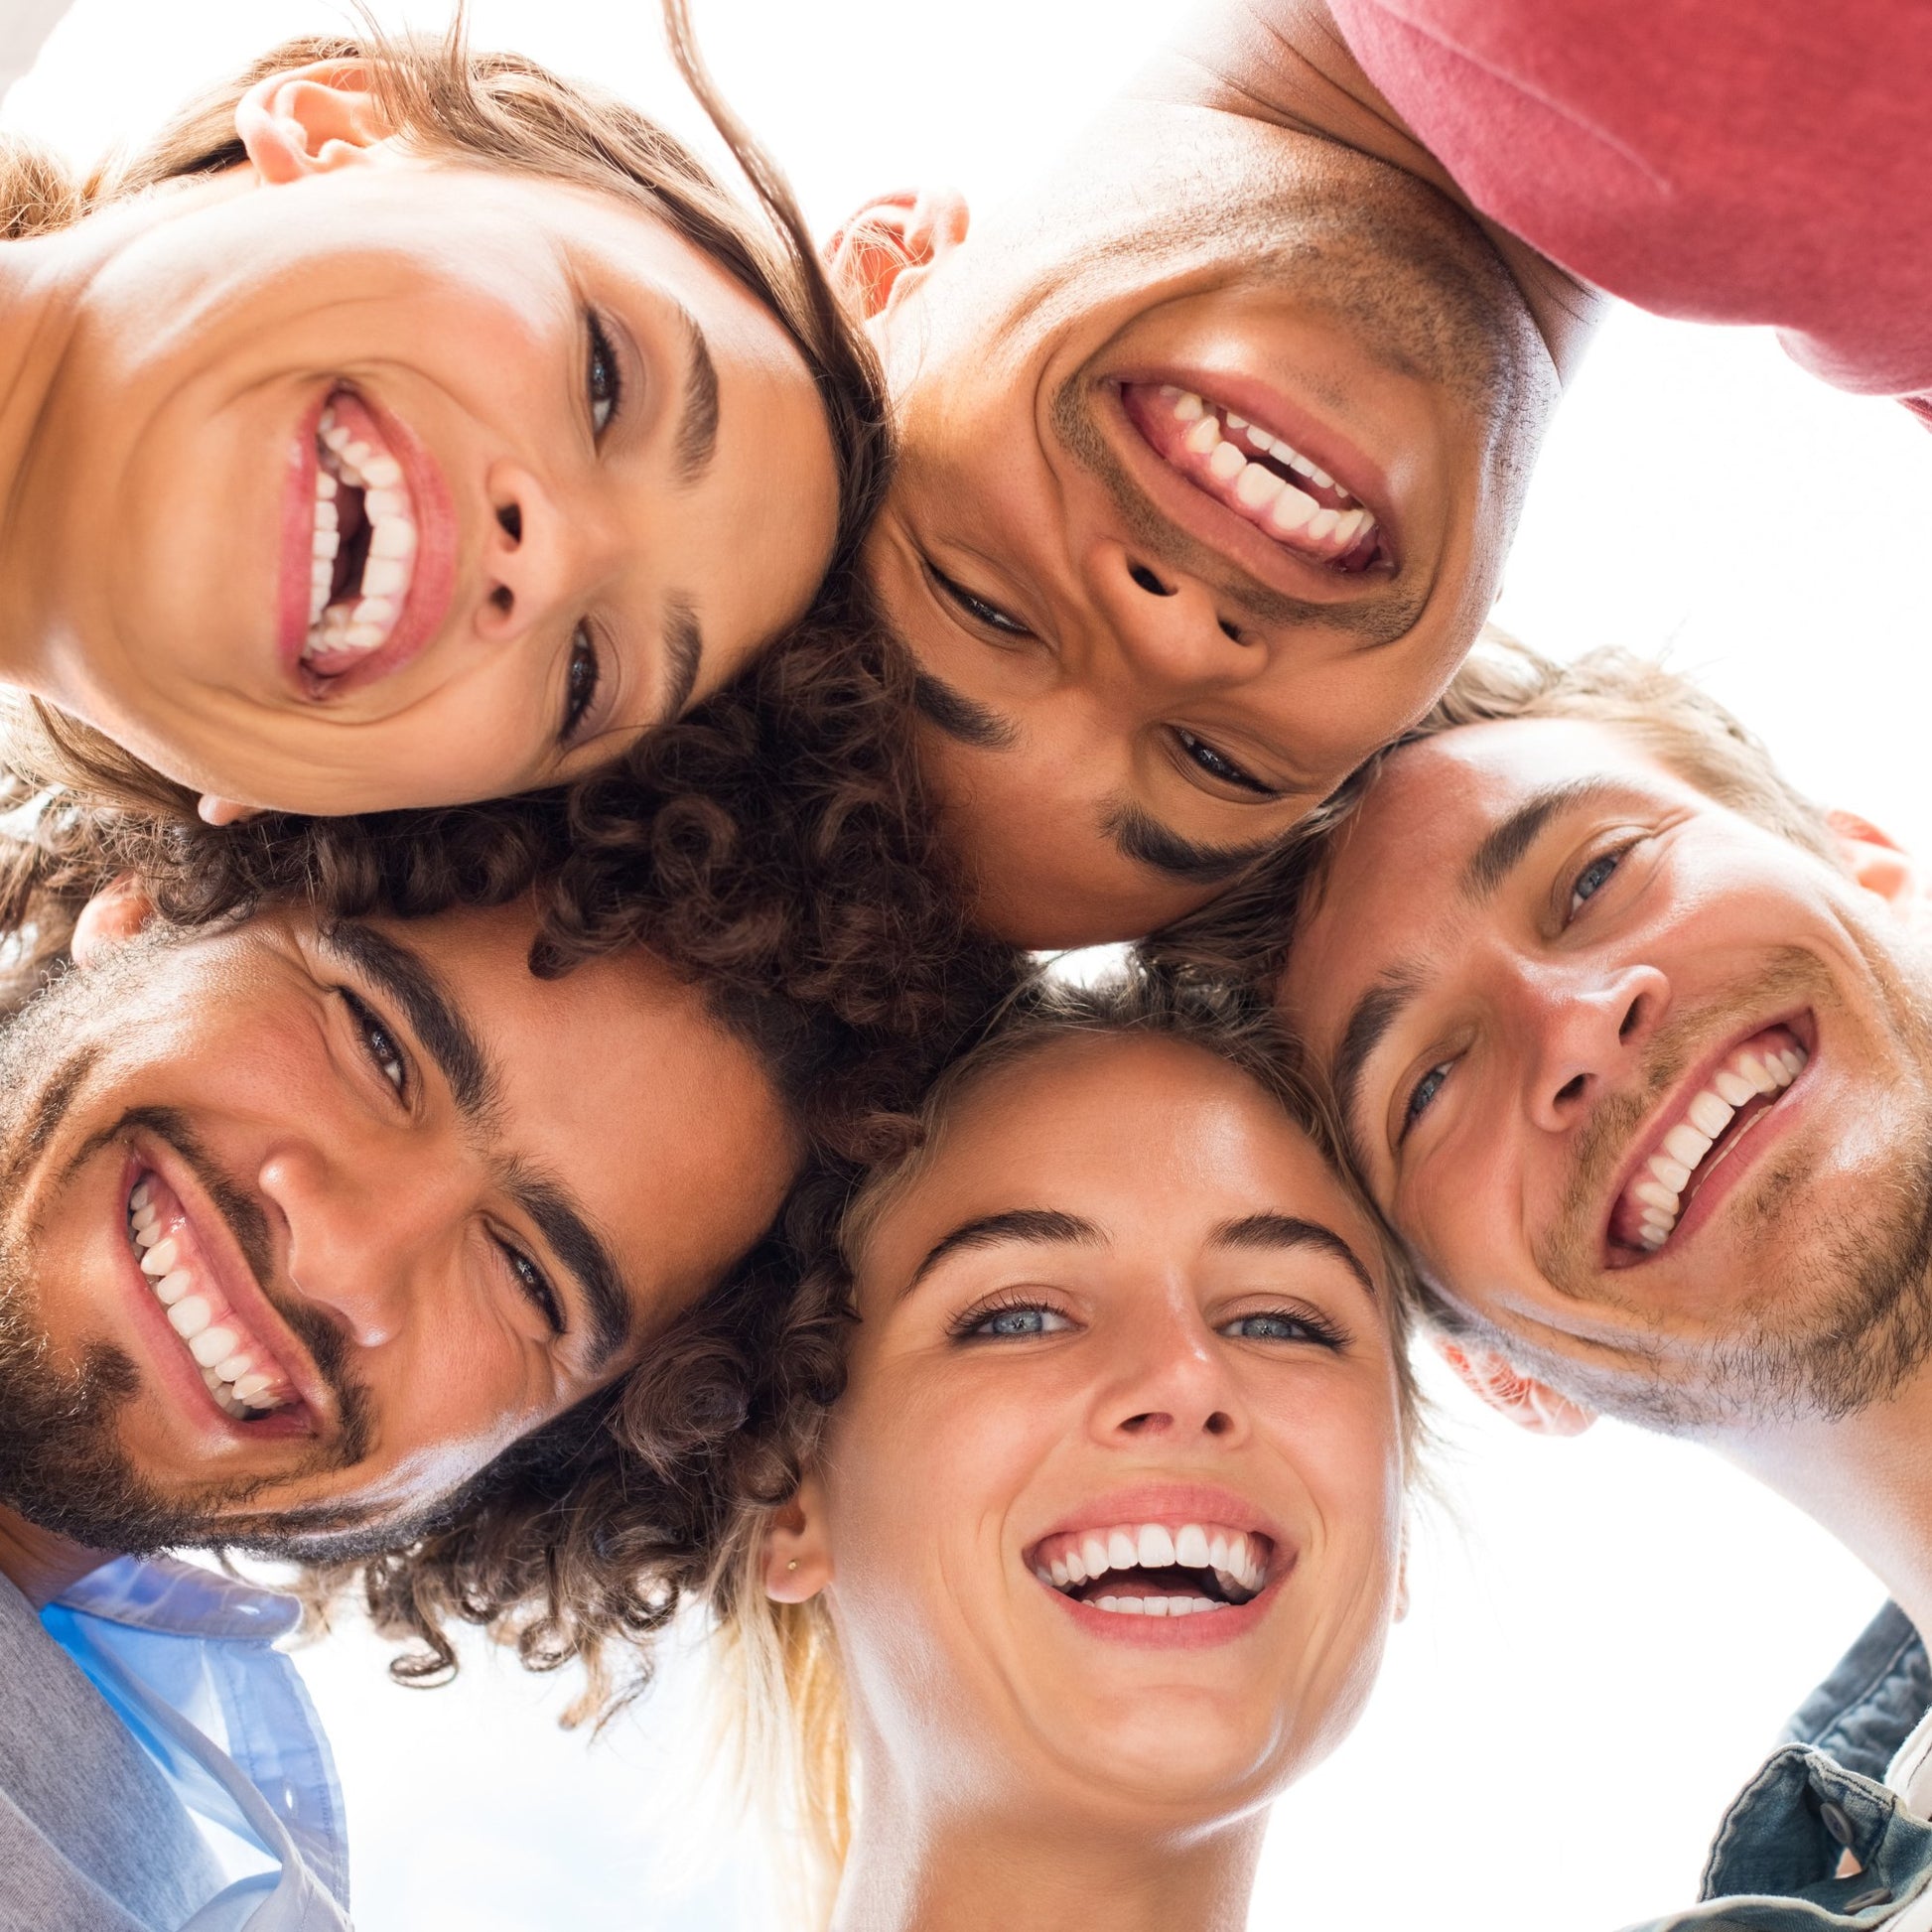 group of smiling people with white teeth